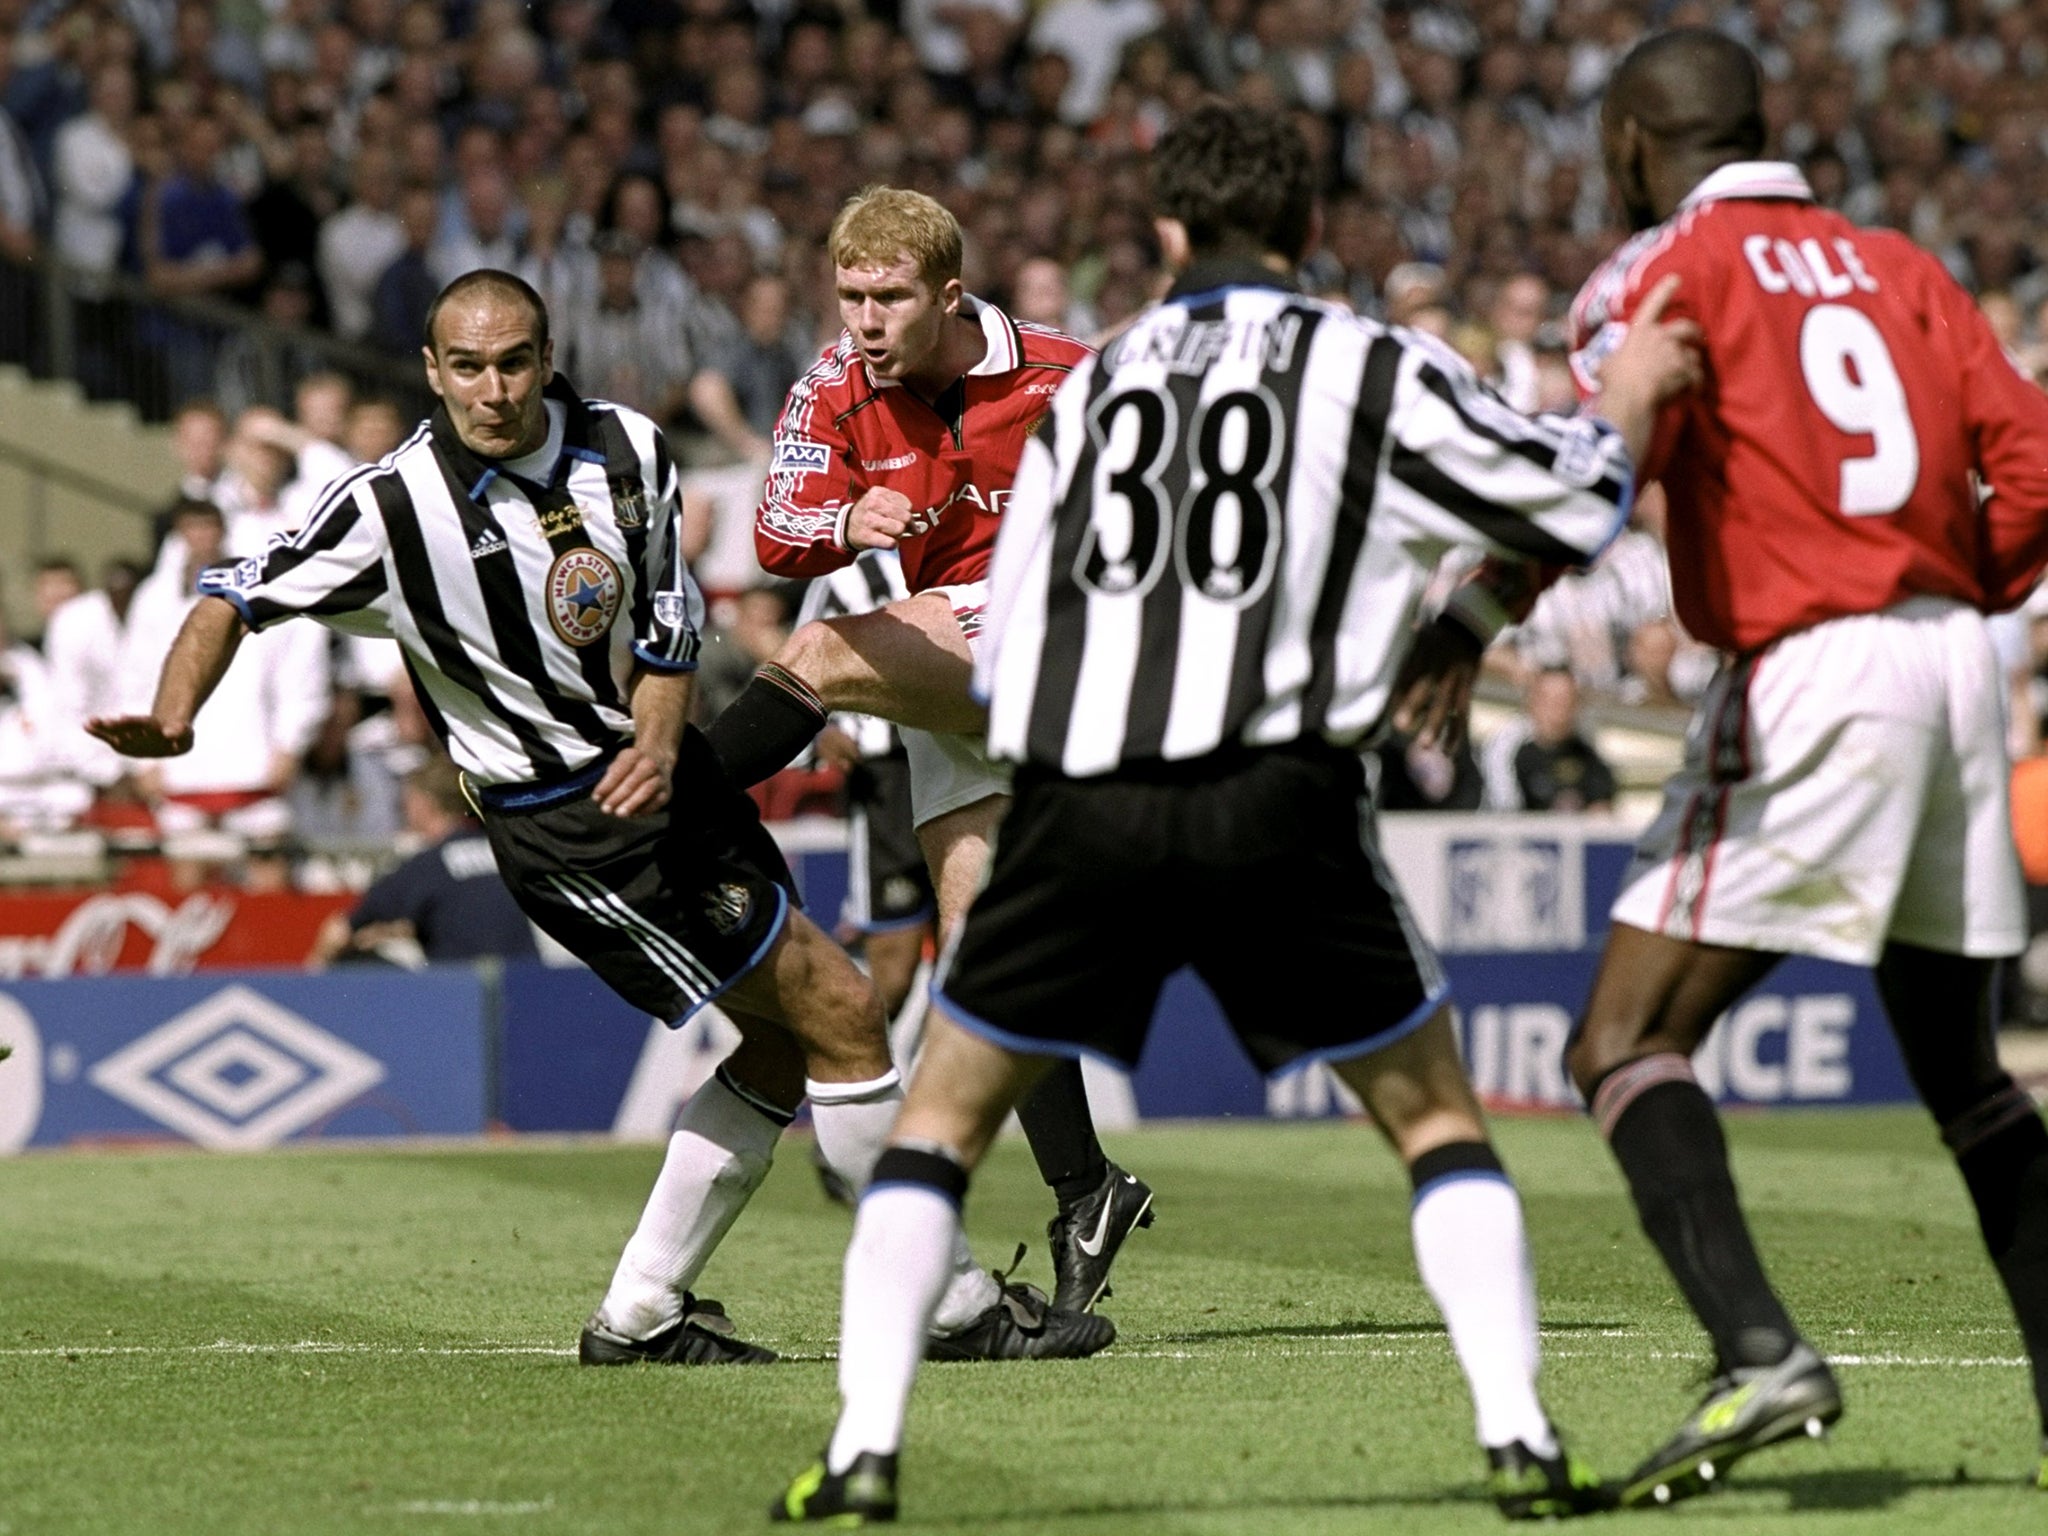 Paul Scholes scores in the 1999 FA Cup final against Newcastle